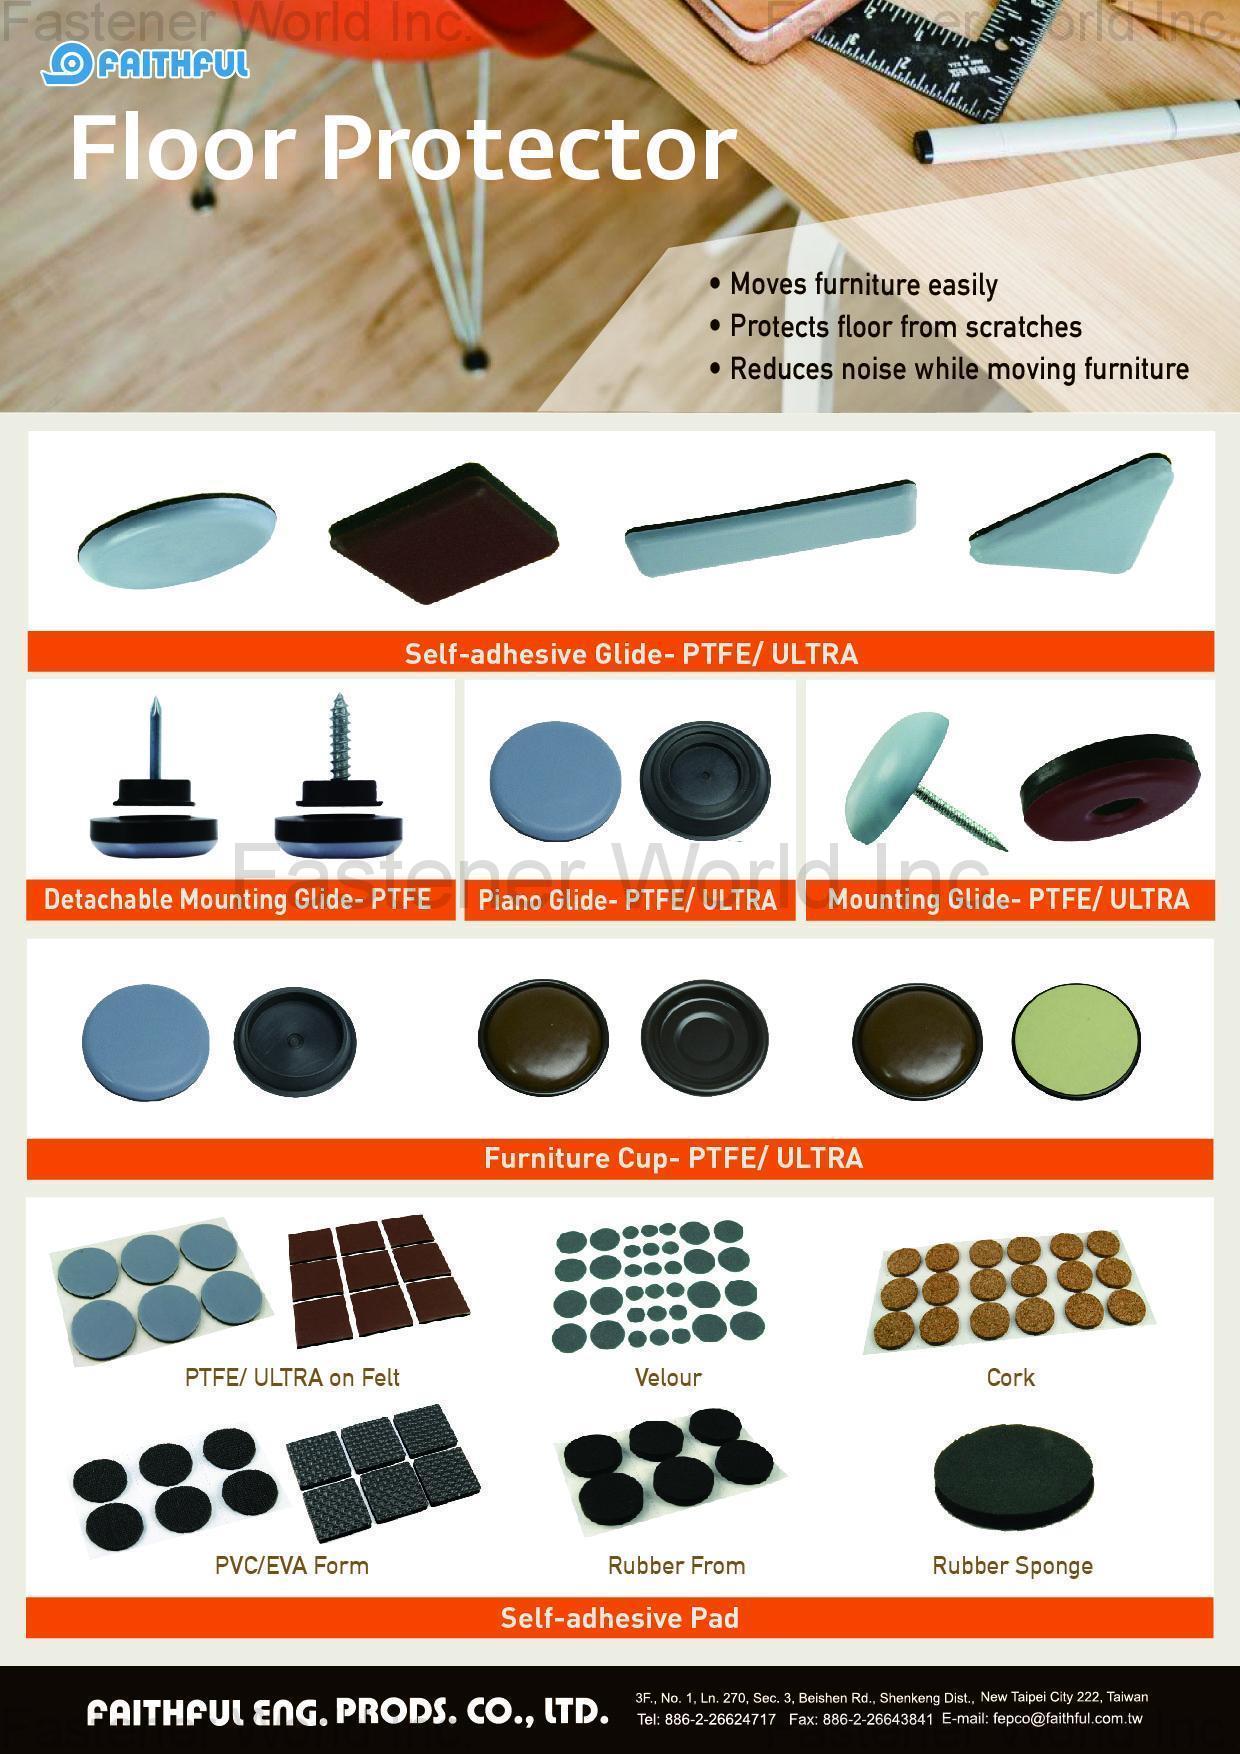 FAITHFUL ENG. PRODS. CO., LTD.  , Floor Protector, self-adhesive glide-PTFE/ULTRA, Detachable Mounting Glide-PTFE, Piano Glide-PTFE/ULTRA, Mounting Glide-PTFE/ULTRA, Furniture Cup-PTFE/ULTRA, Self-adhesive Pad , Casters